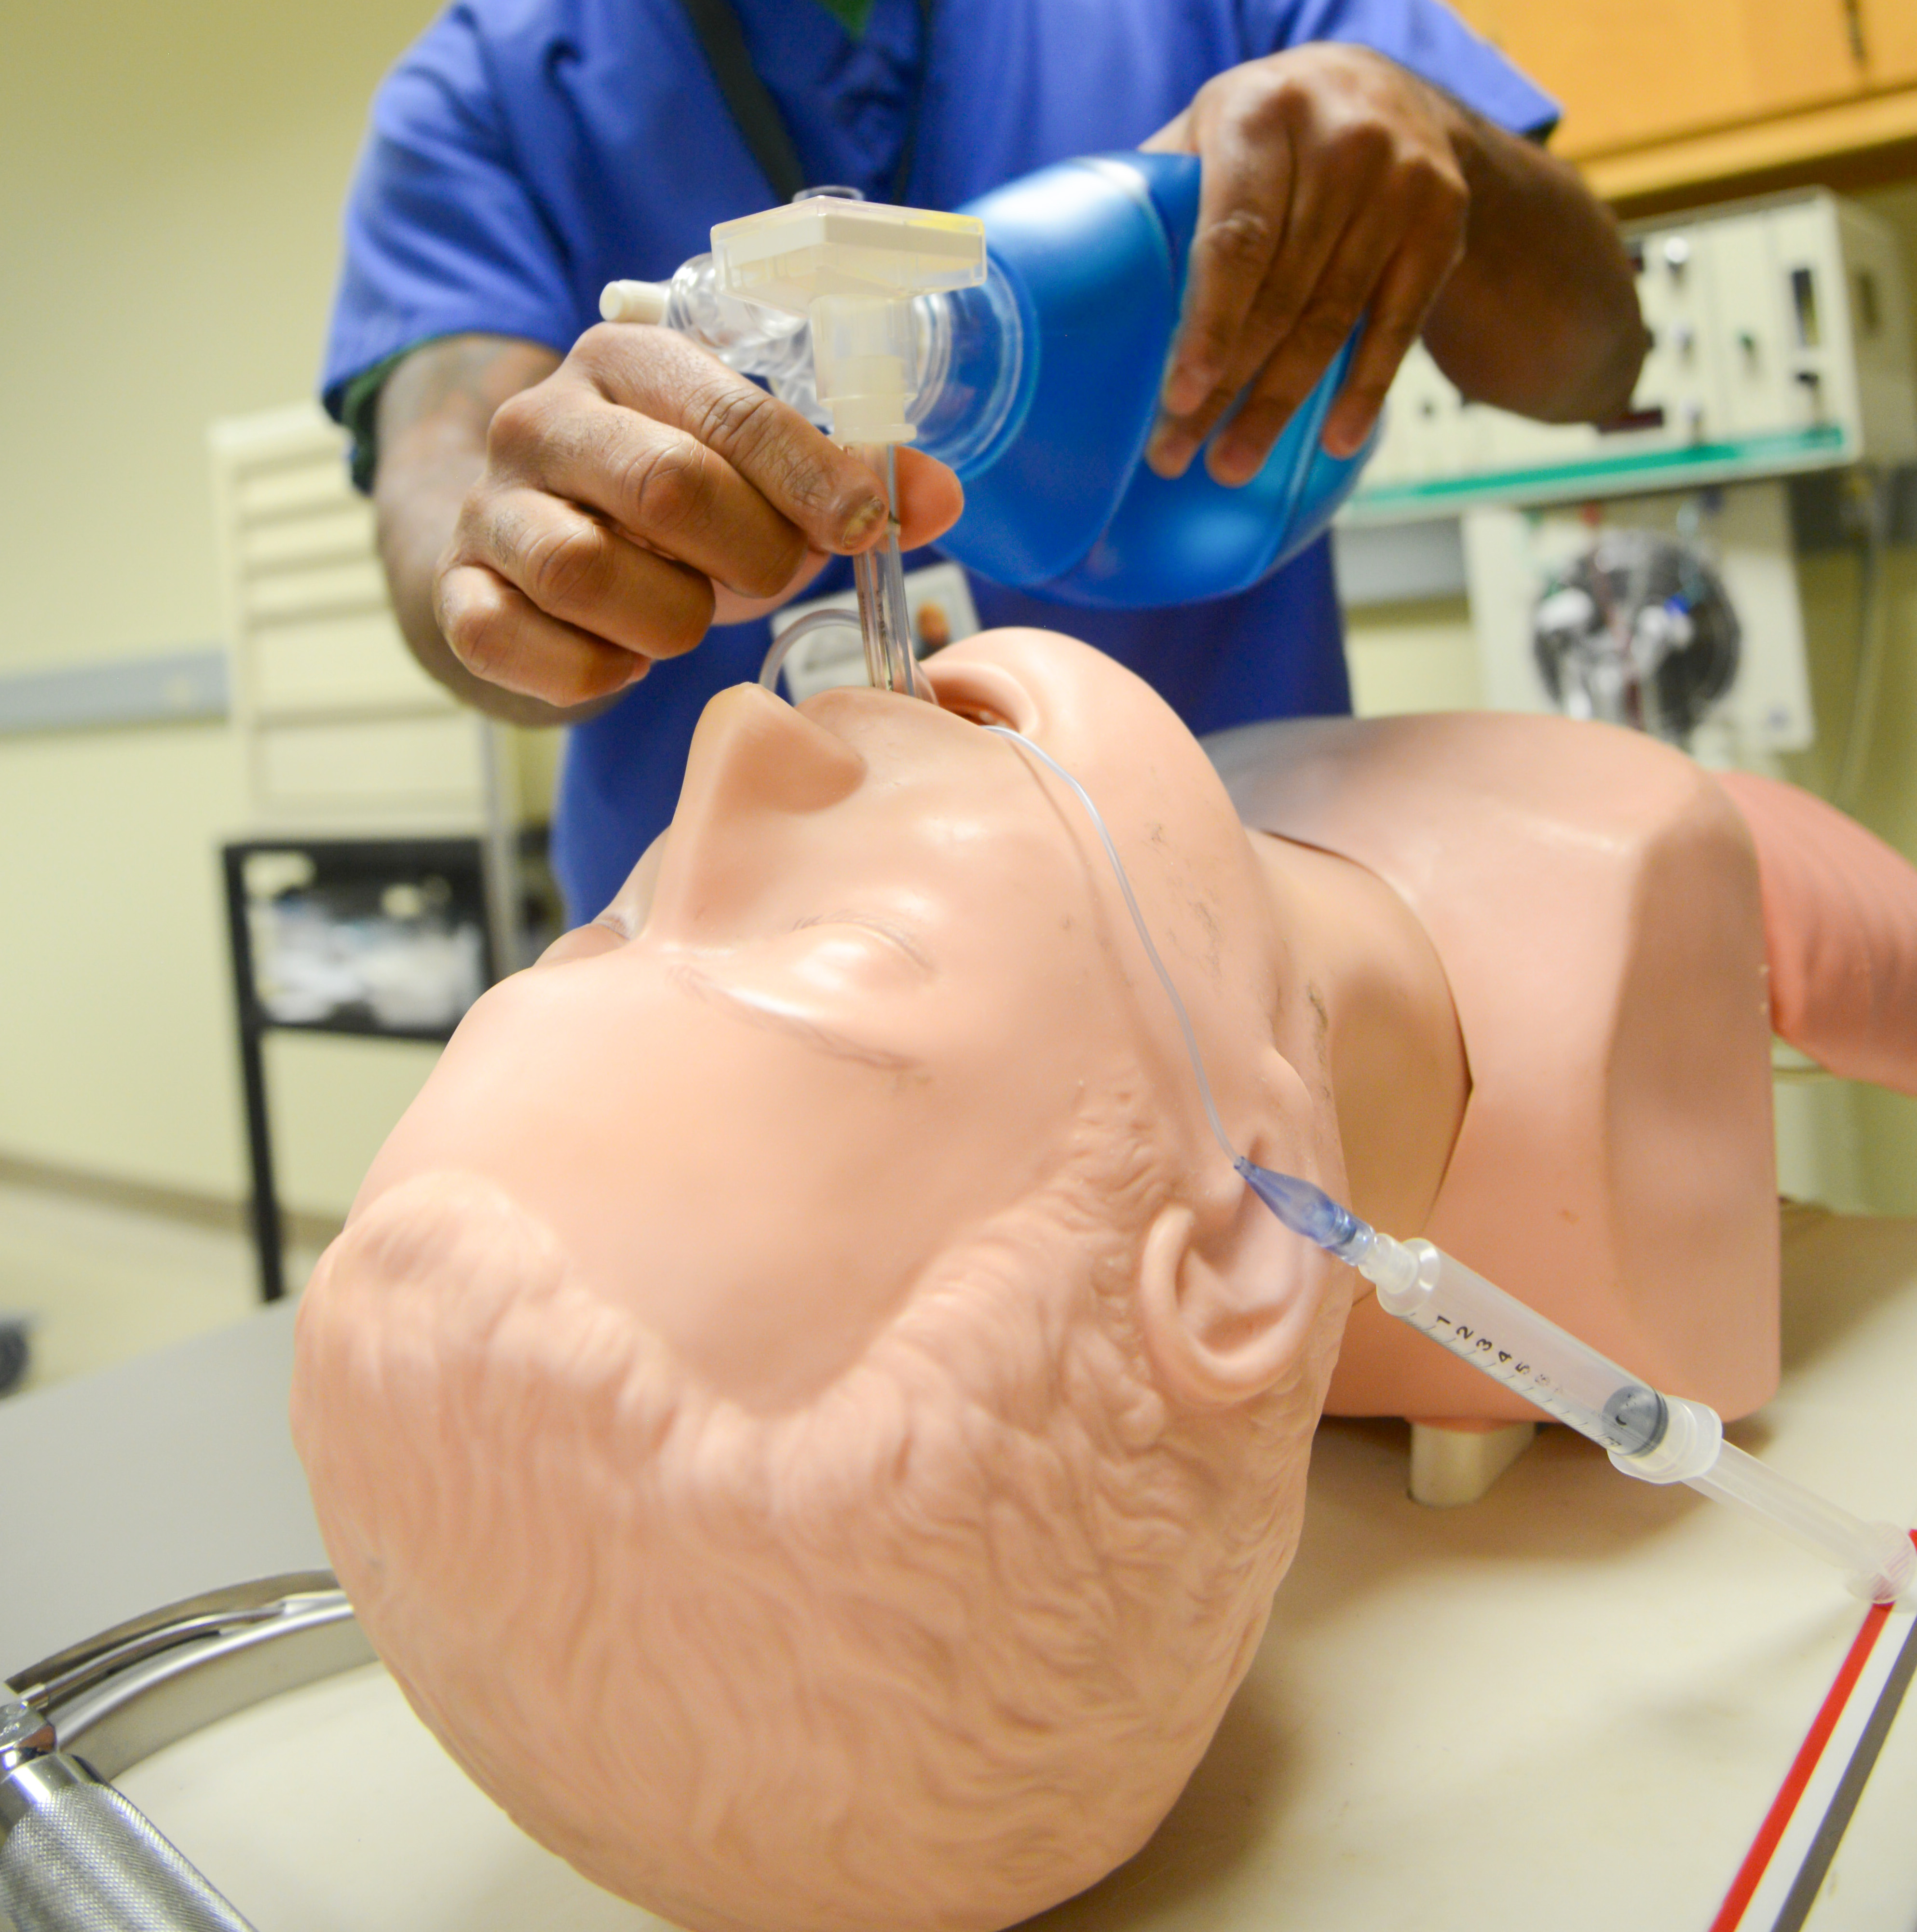 student standing over a mannequin and practicing intubation